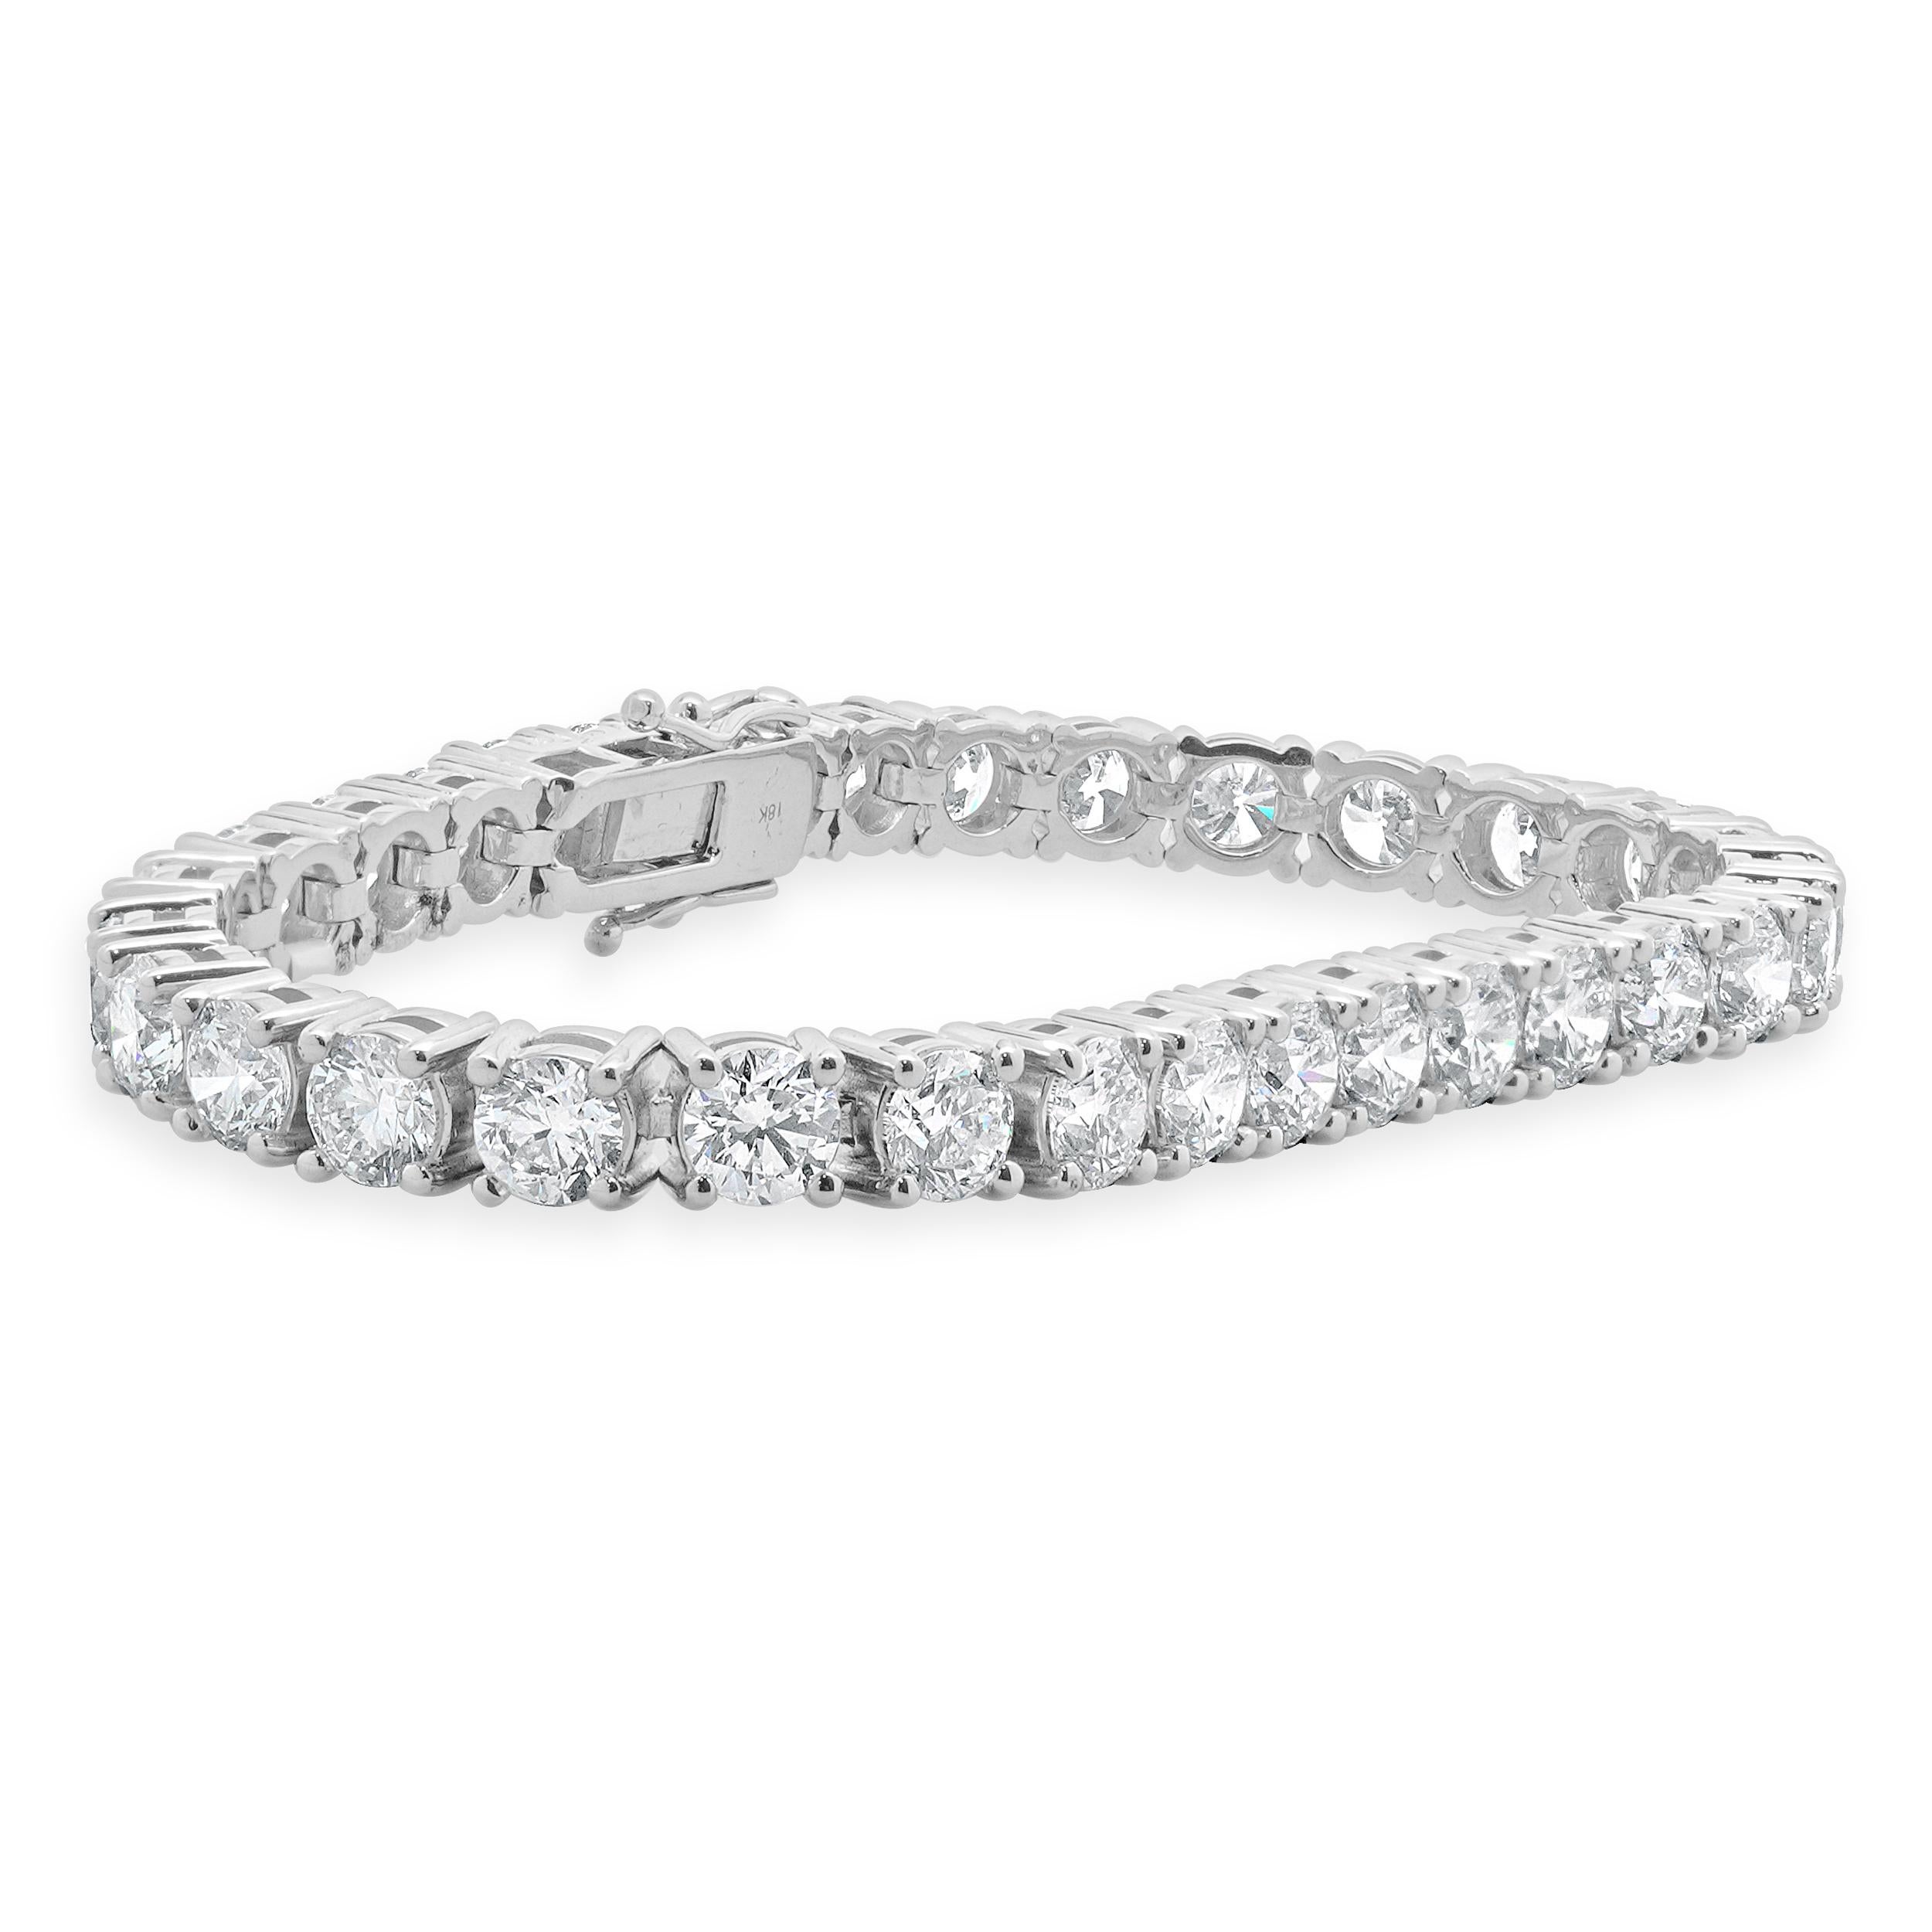 Designer: custom design
Material: 18K white Gold
Diamond: 32 round brilliant cut = 16.25cttw
Color: G
Clarity: VS
Dimensions: bracelet will fit up to a 7-inch wrist
Weight: 27.16 grams
